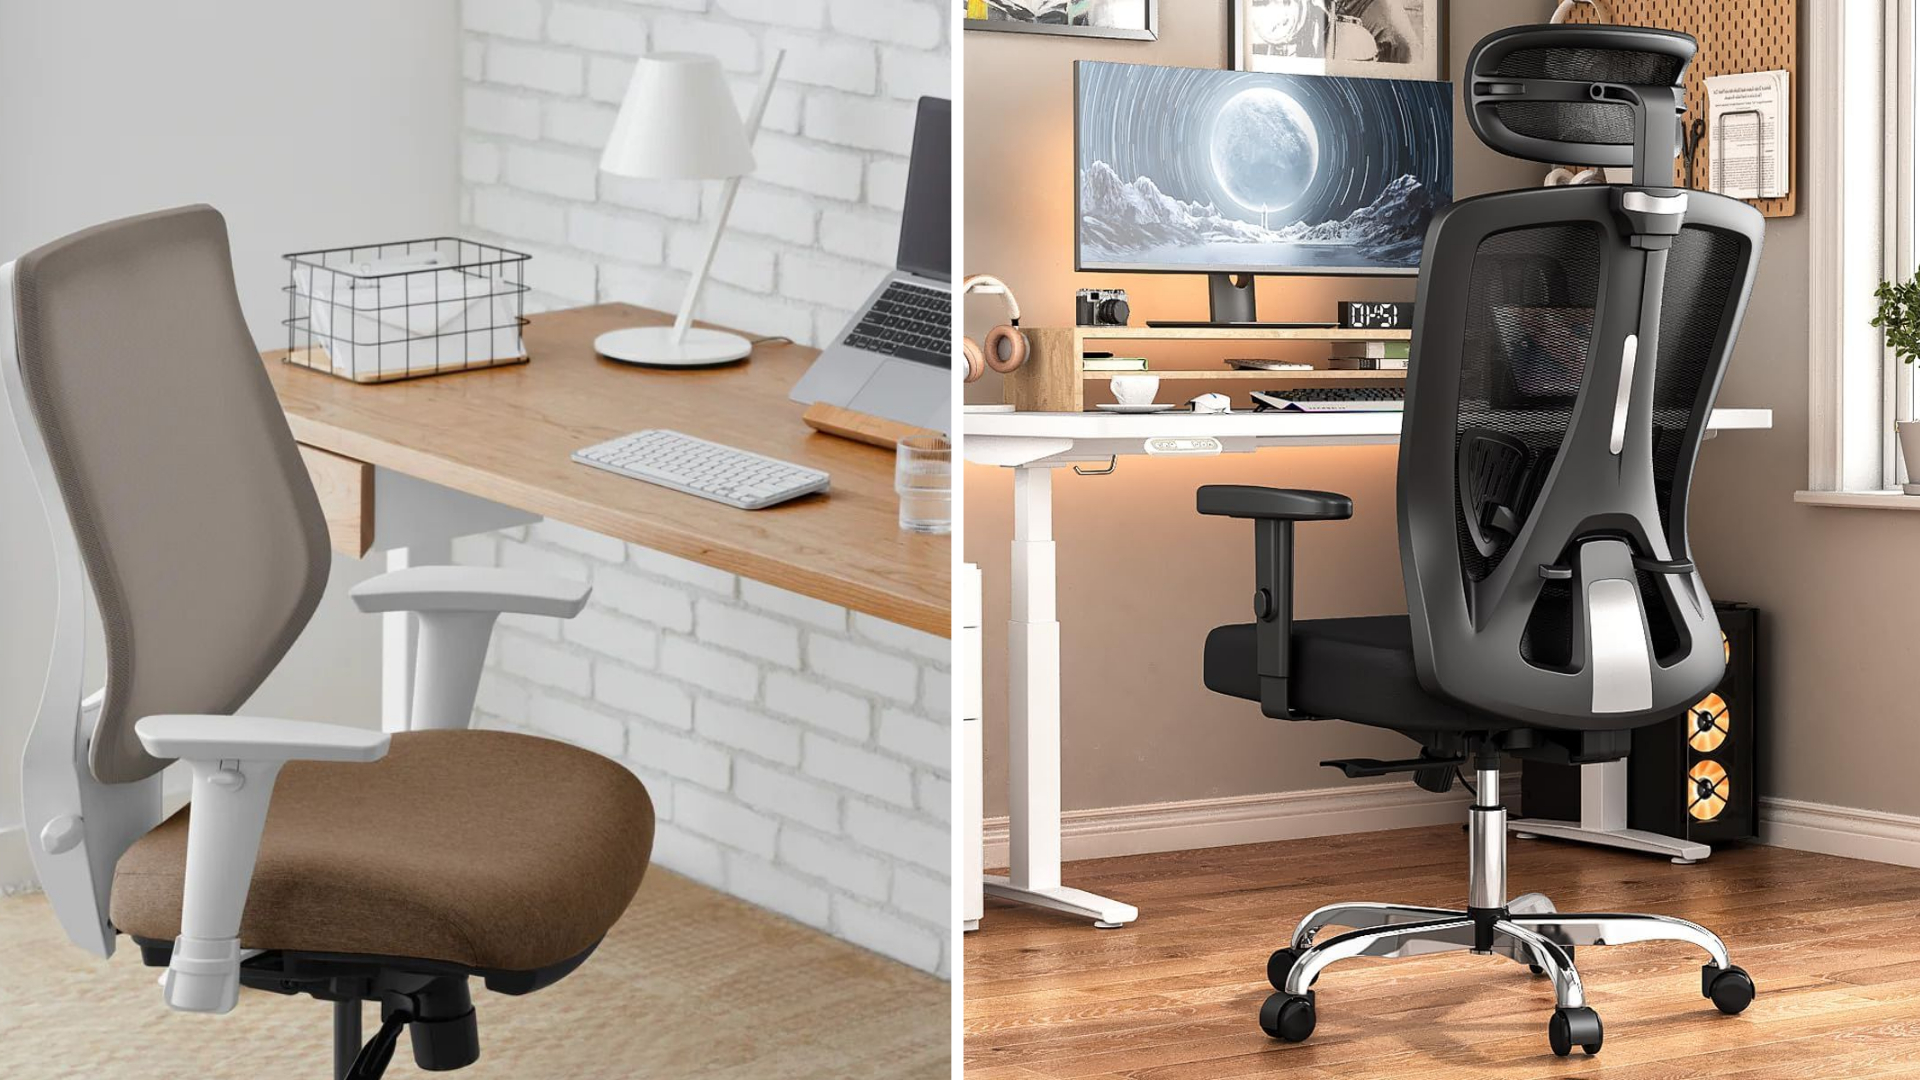 7 ergonomic gadgets to make your work-from-home office a lot more